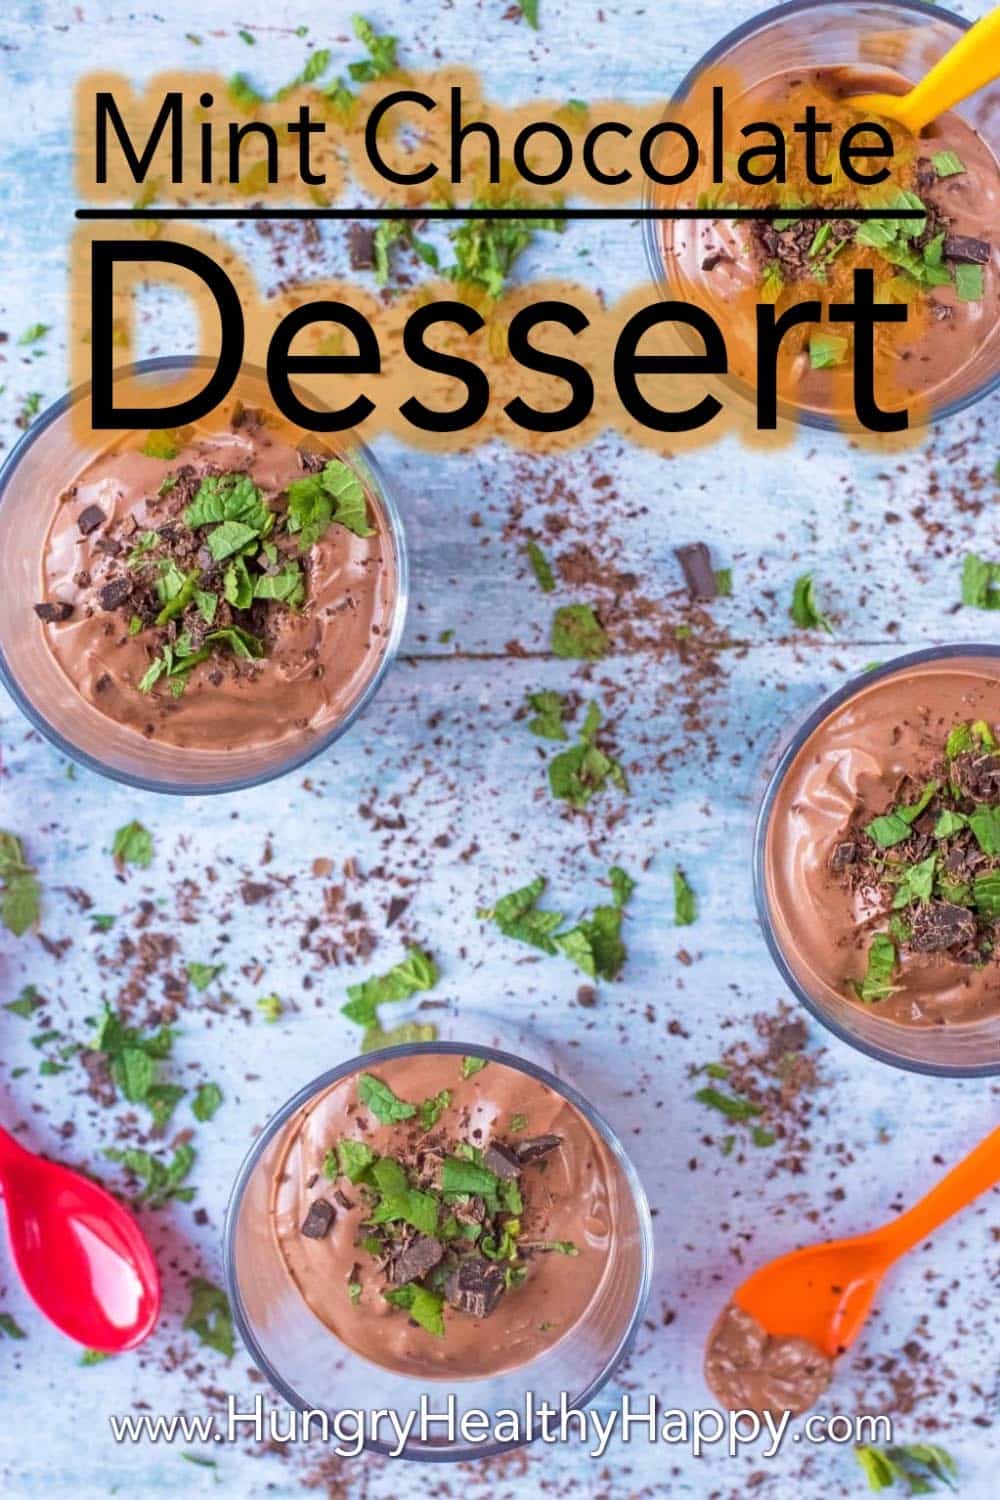 Mint Chocolate Dessert - Hungry Healthy Happy